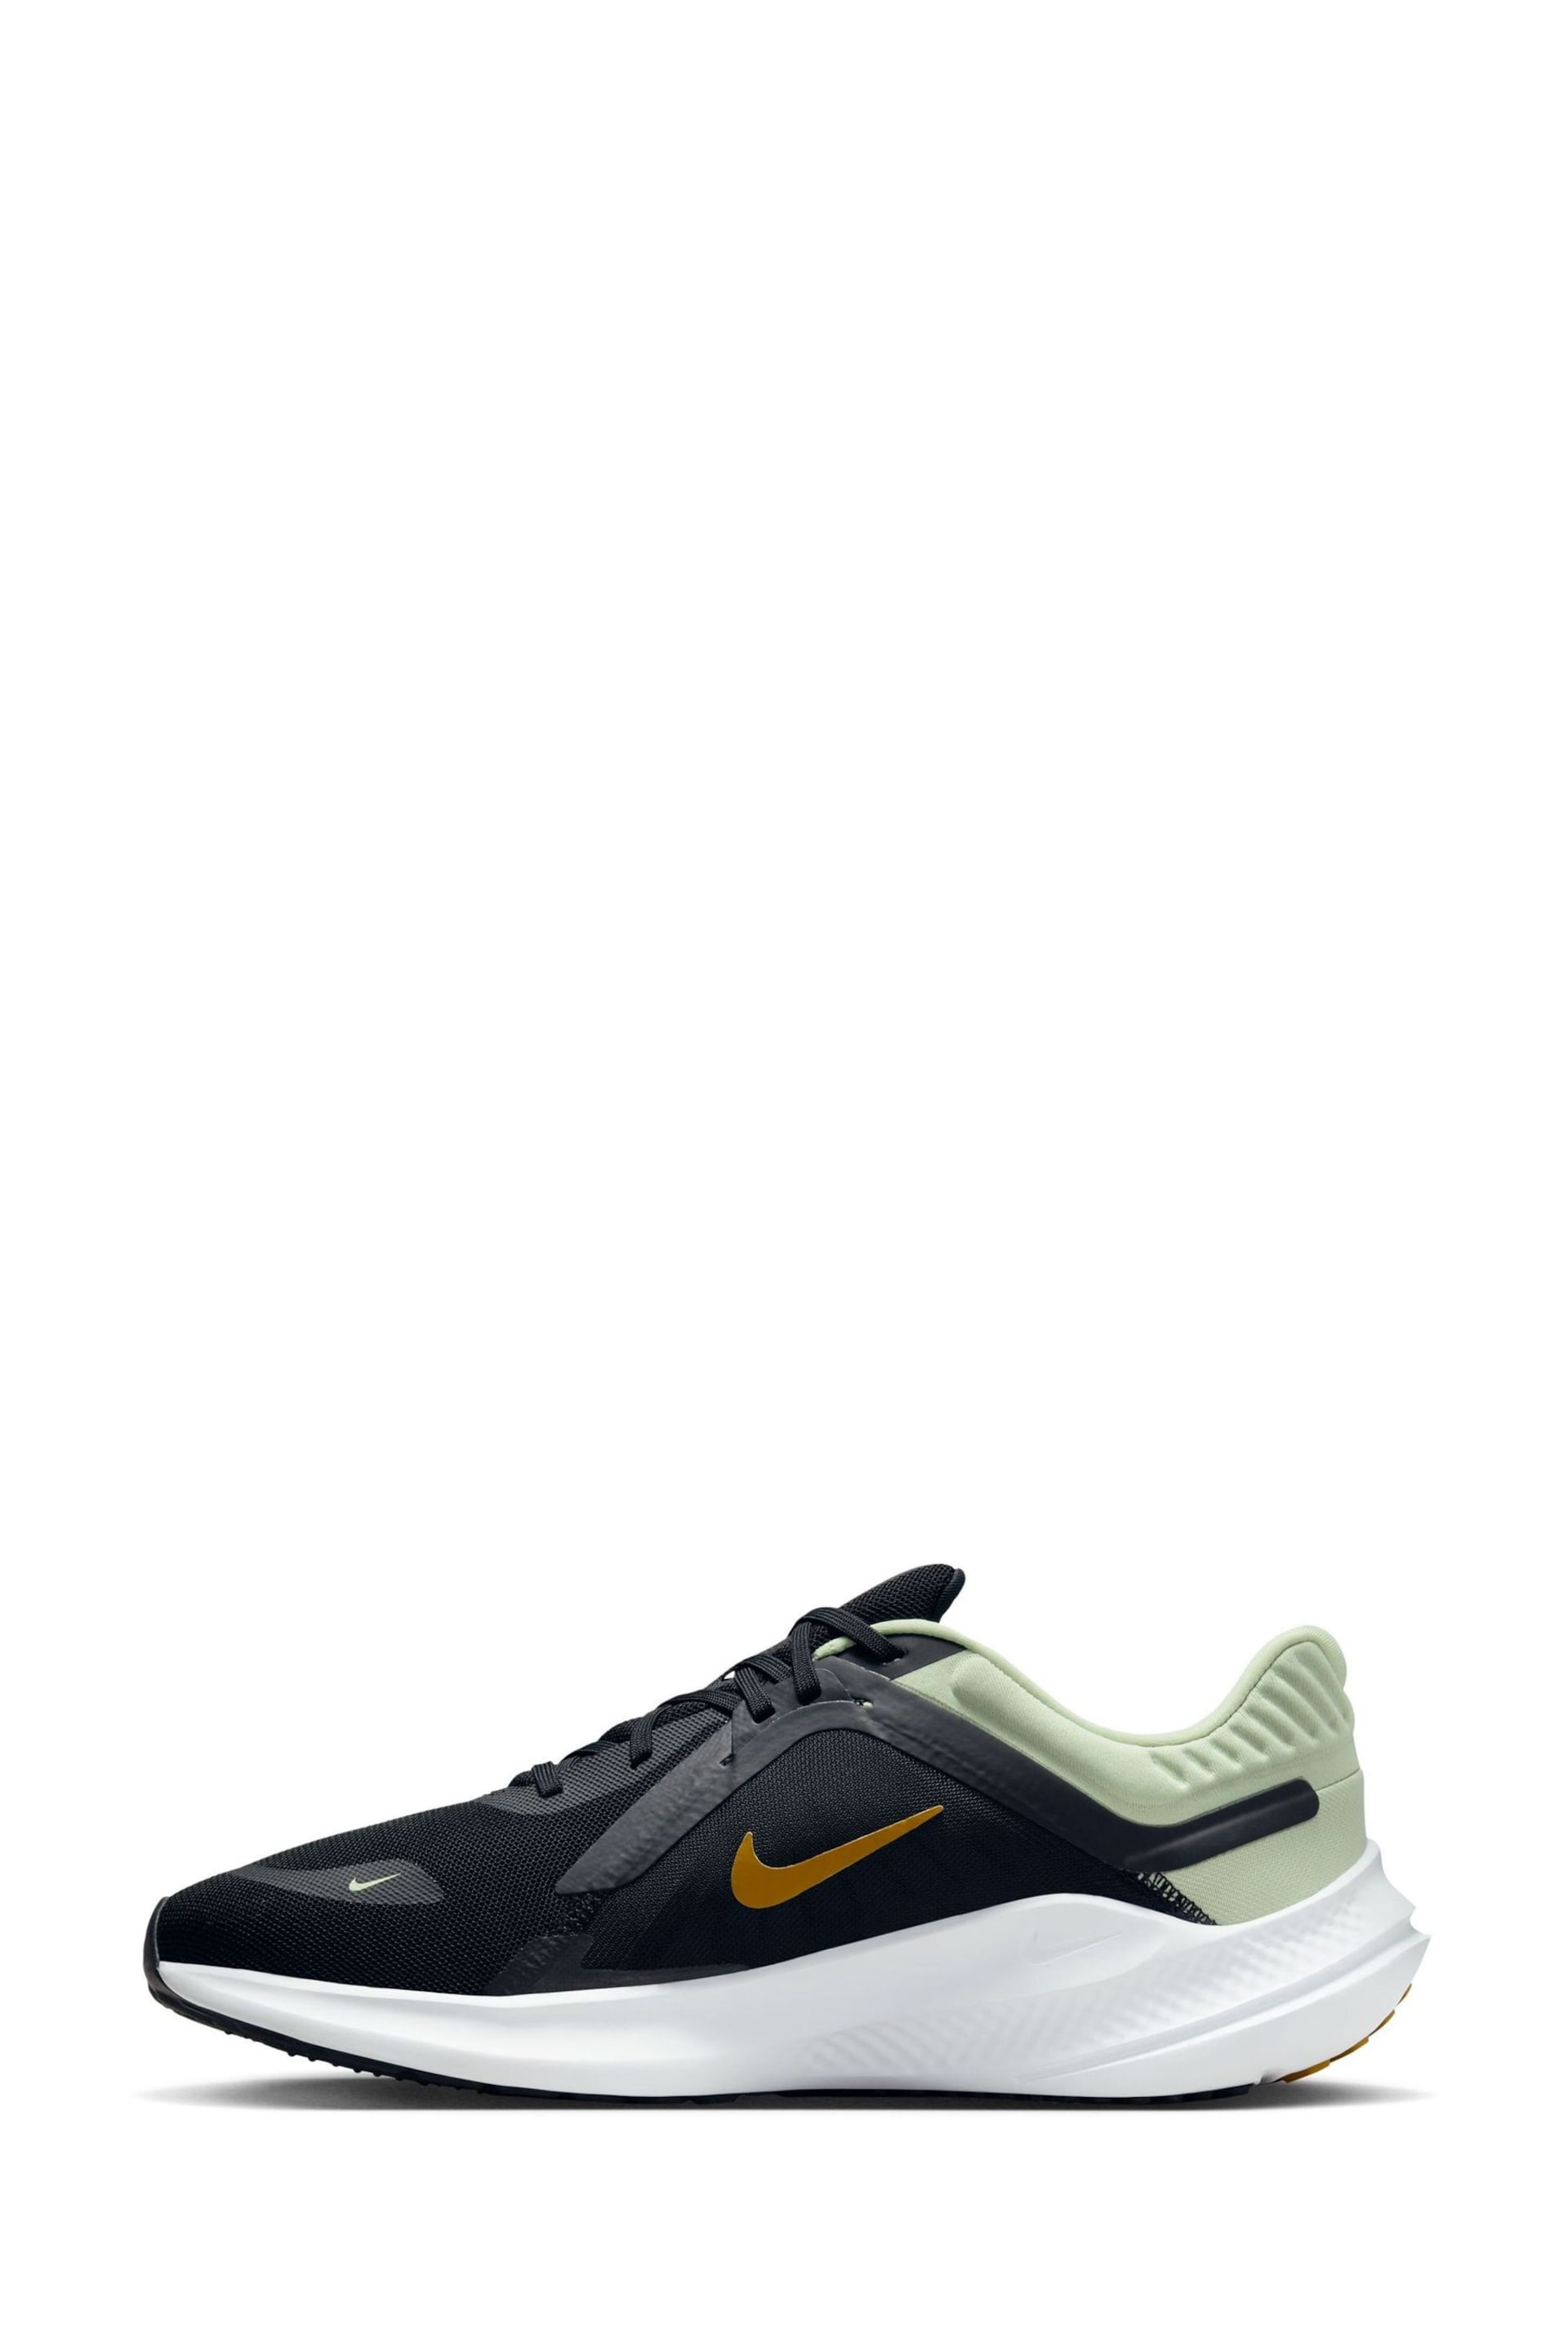 Nike Green Quest 5 Road Running Trainers - Image 2 of 10